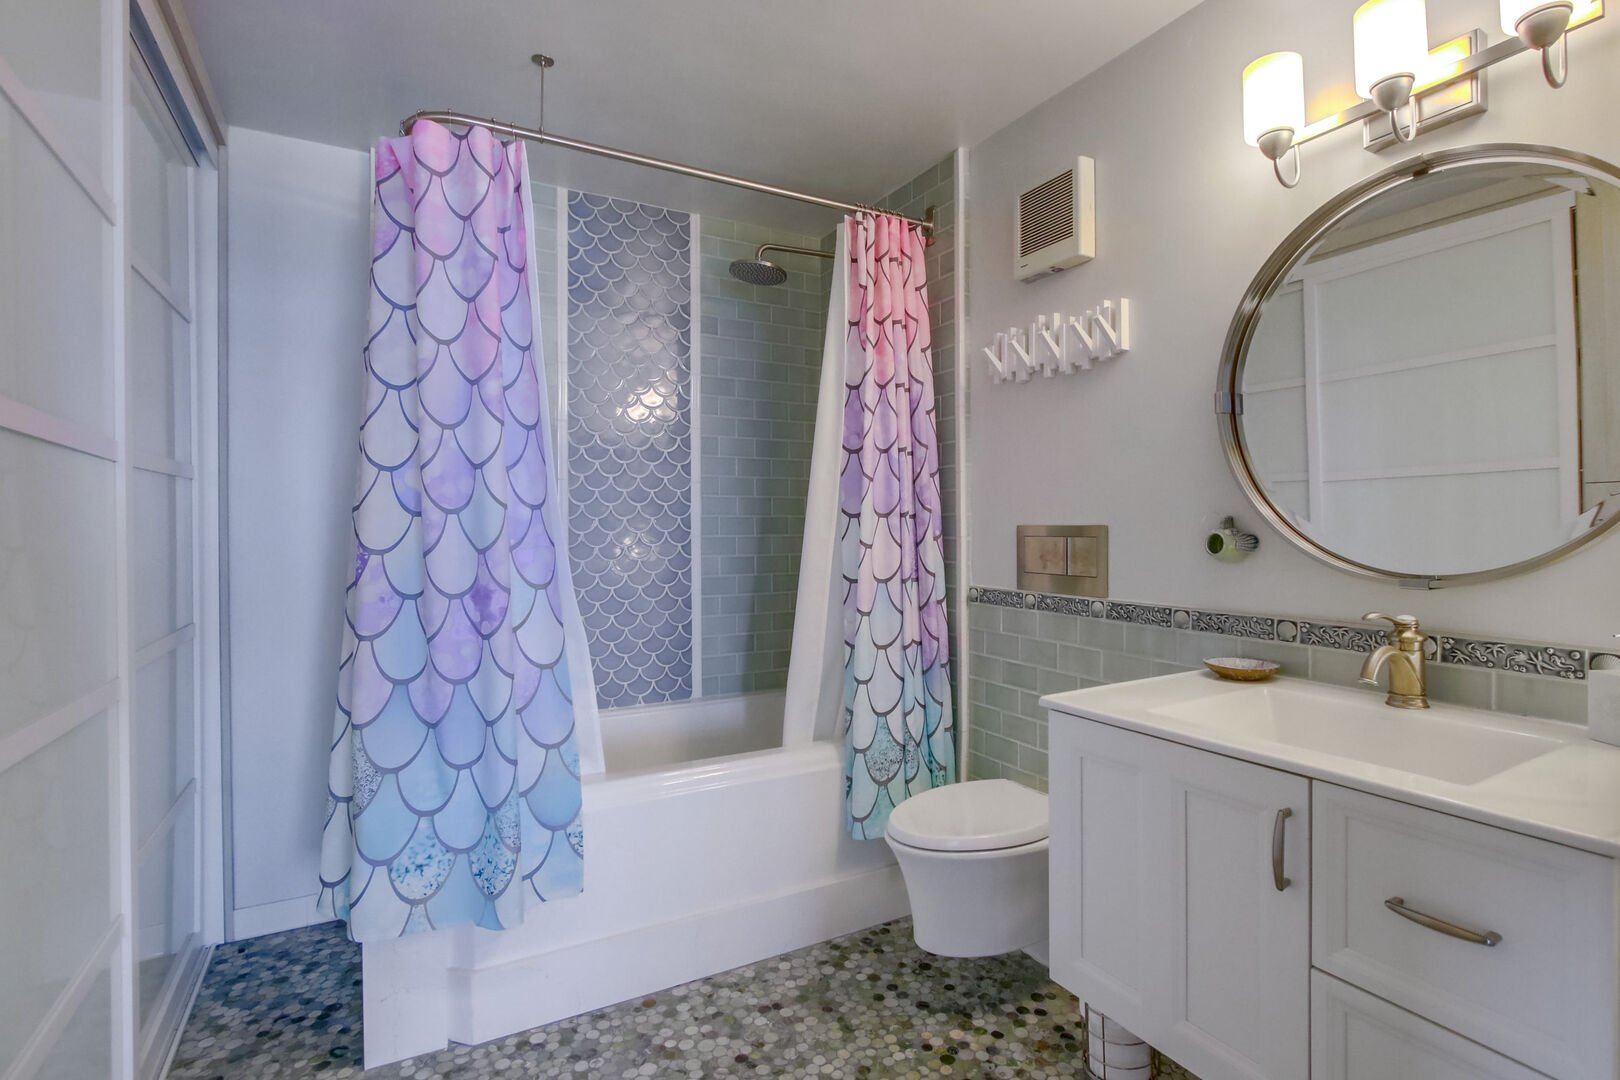 Master bathroom has a shower-tub combo with rainfall shower head, built-in closet and drawers, toilet and luxurious vanity